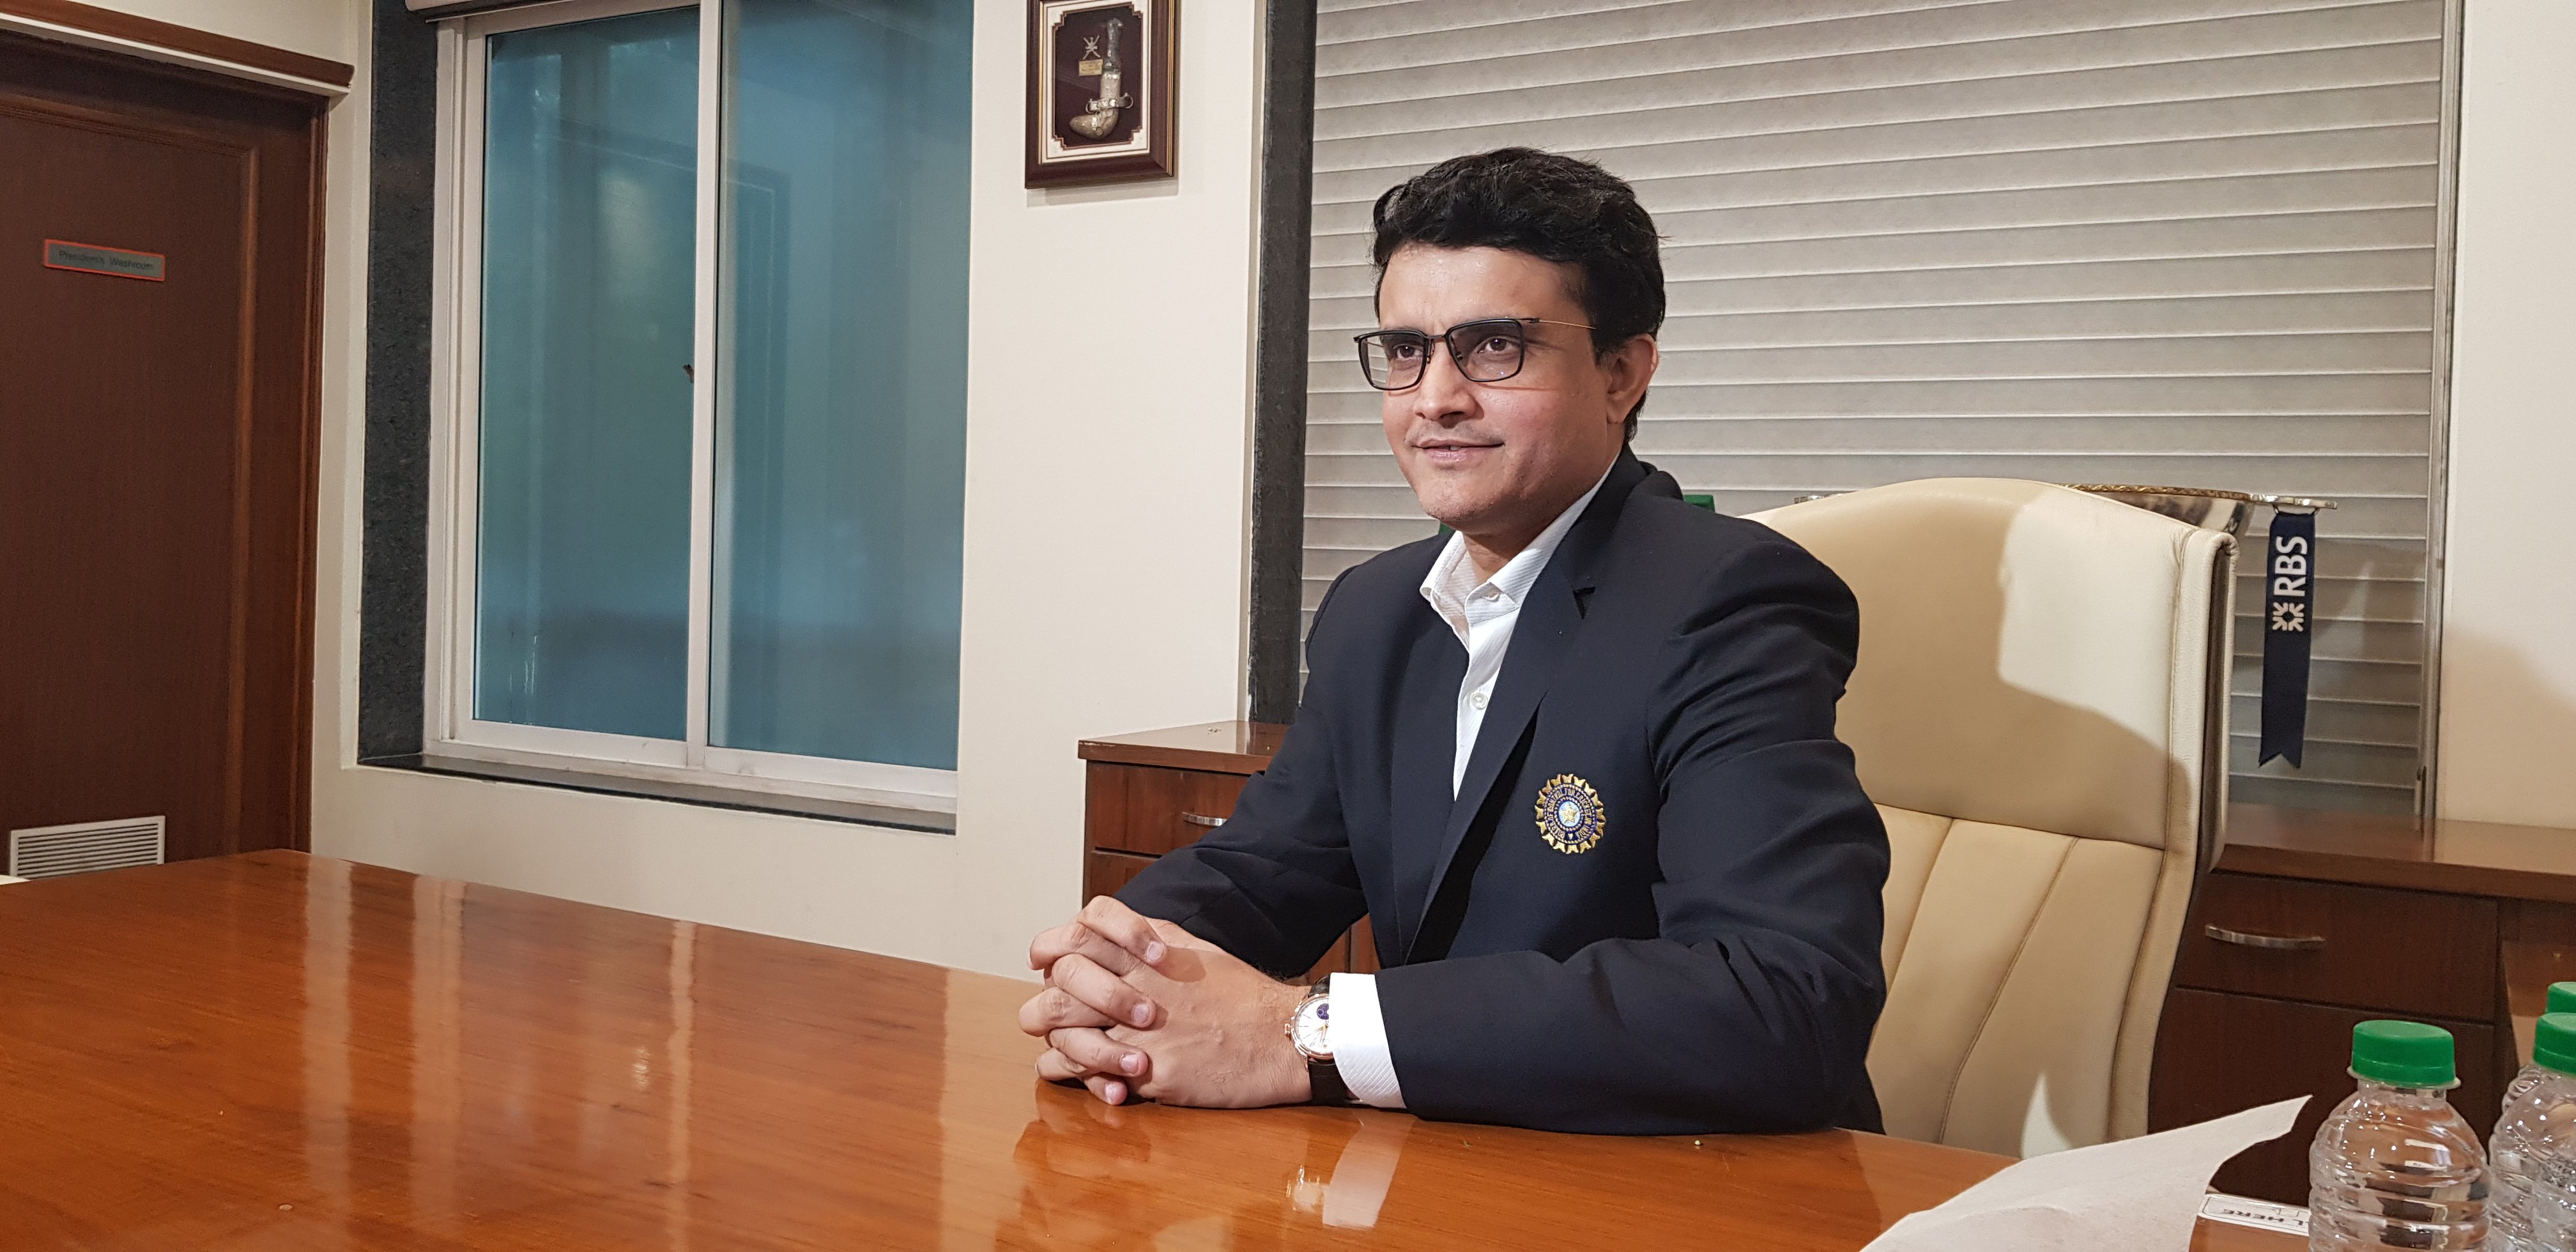 Bihar Cricket Association writes to Sourav Ganguly reporting illegal activities